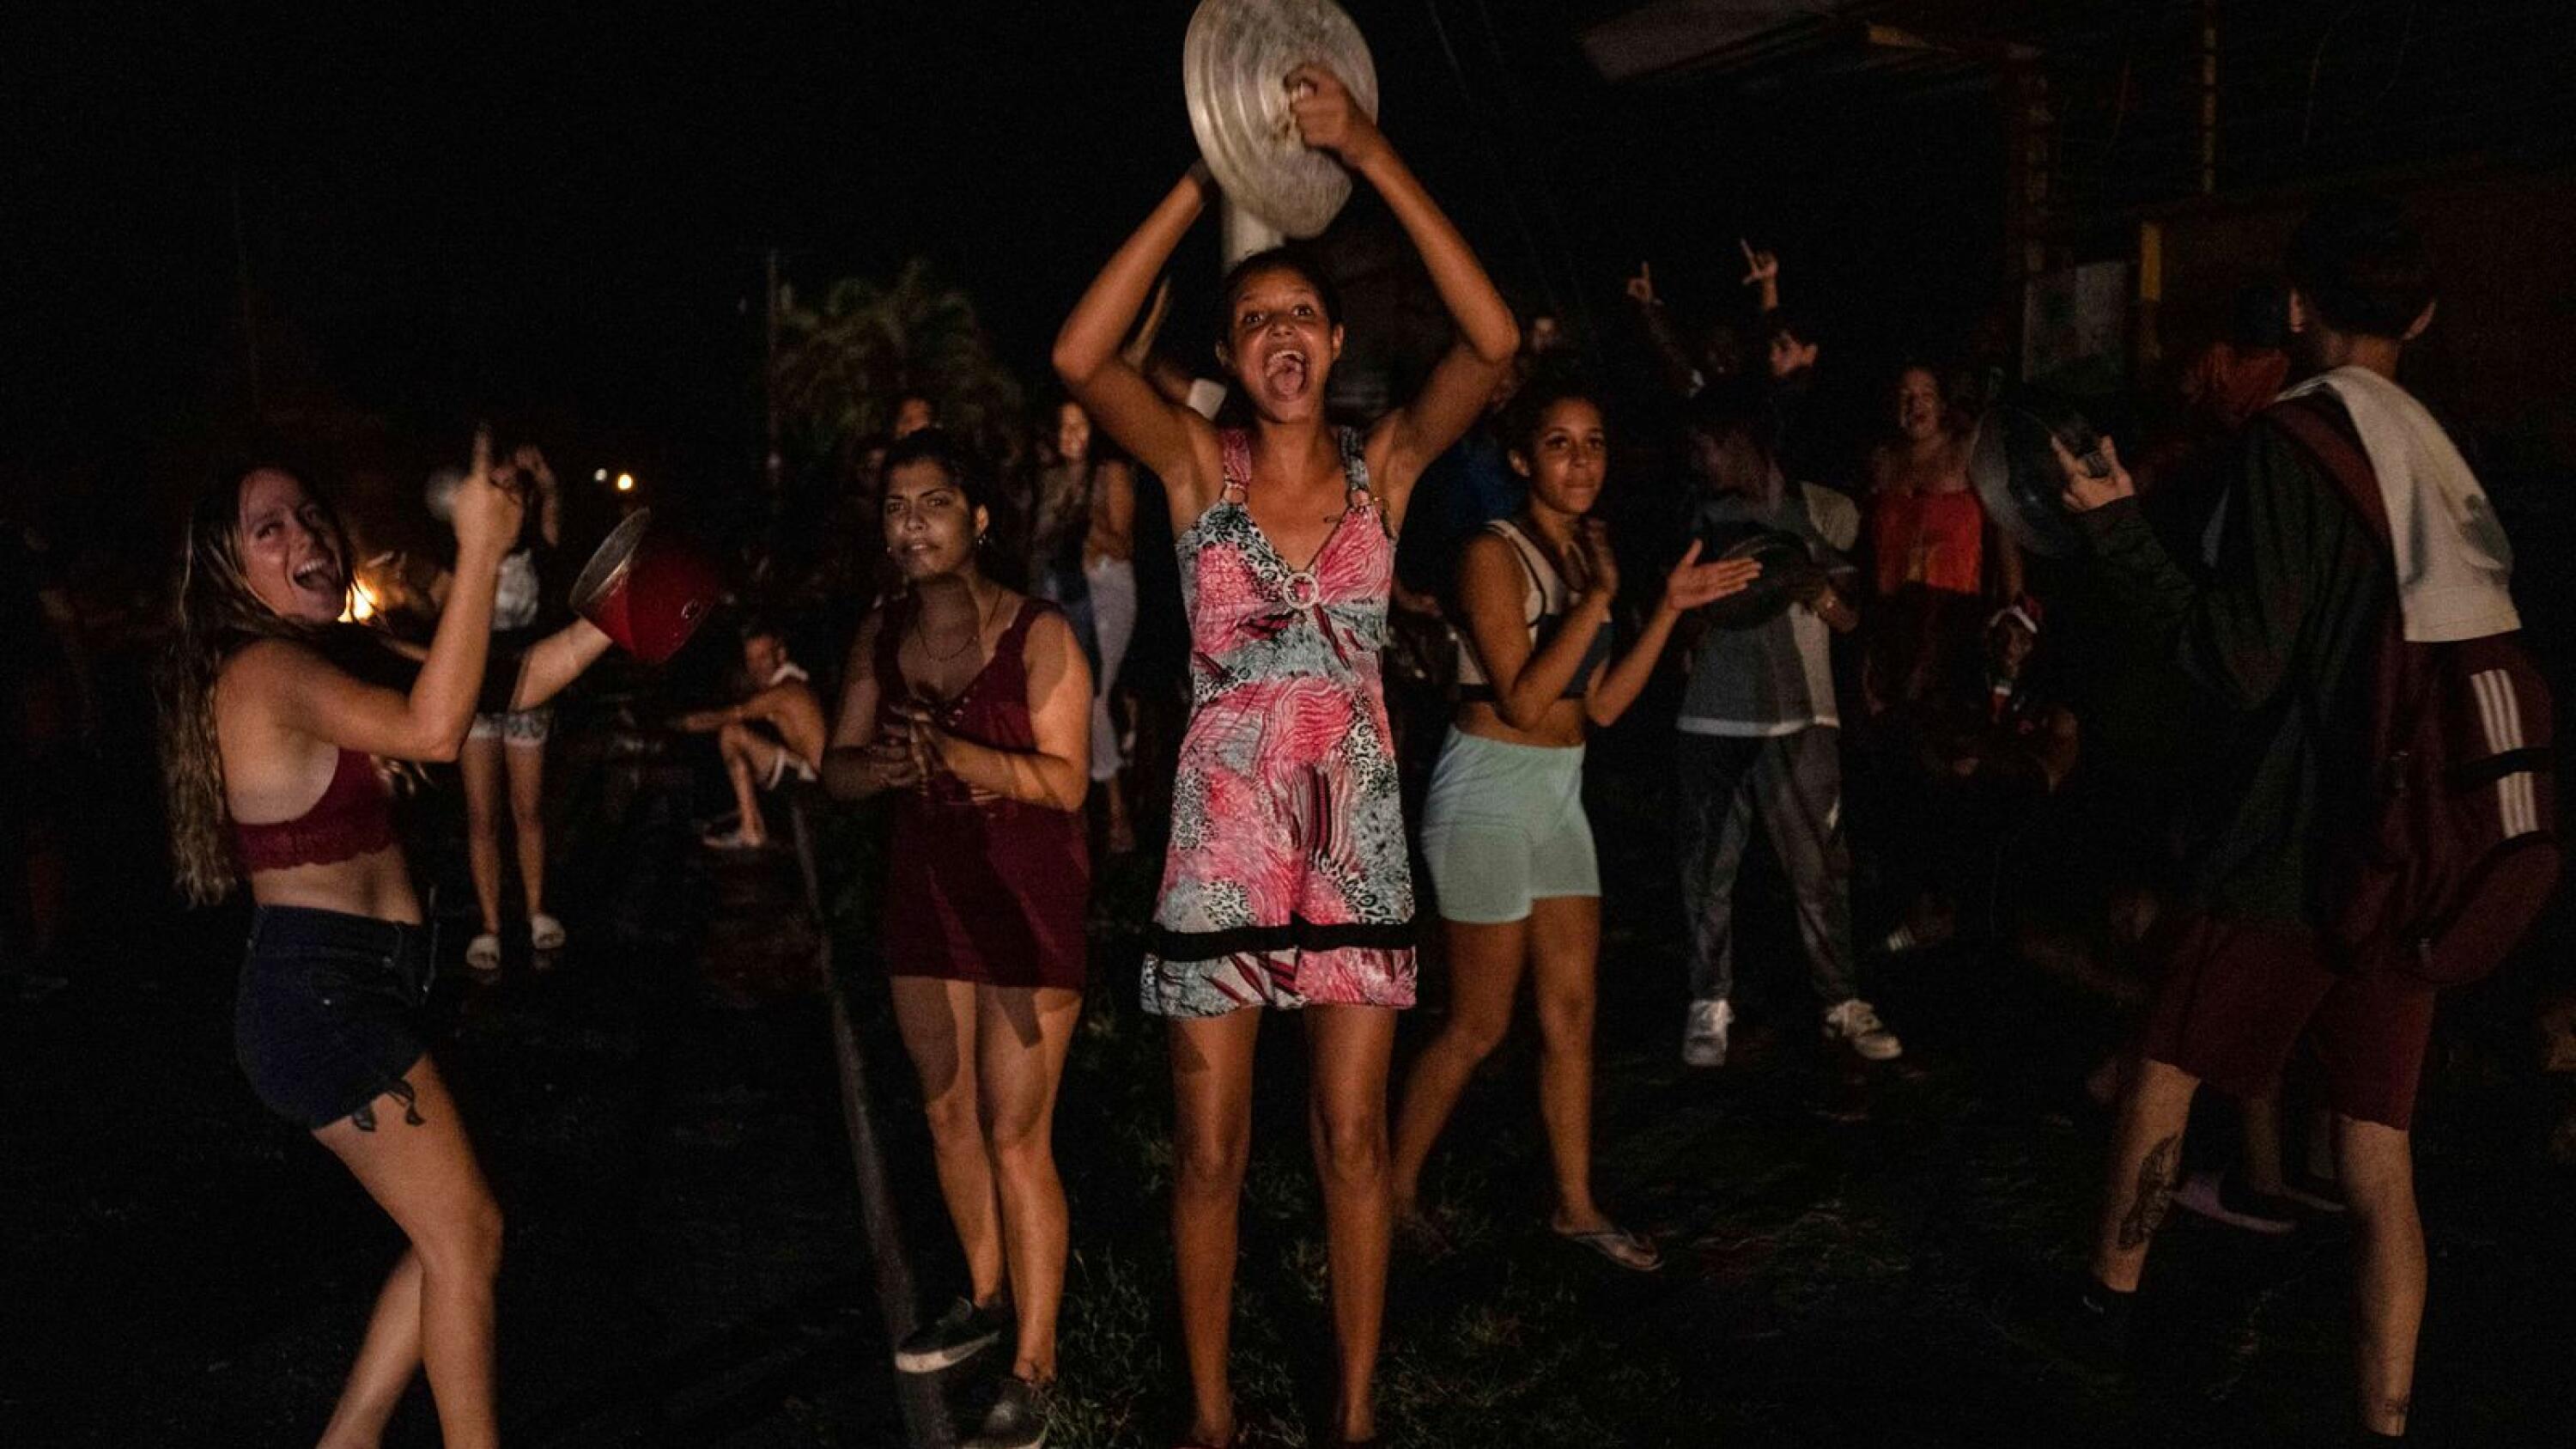 Small protests appear in Havana over islandwide blackout